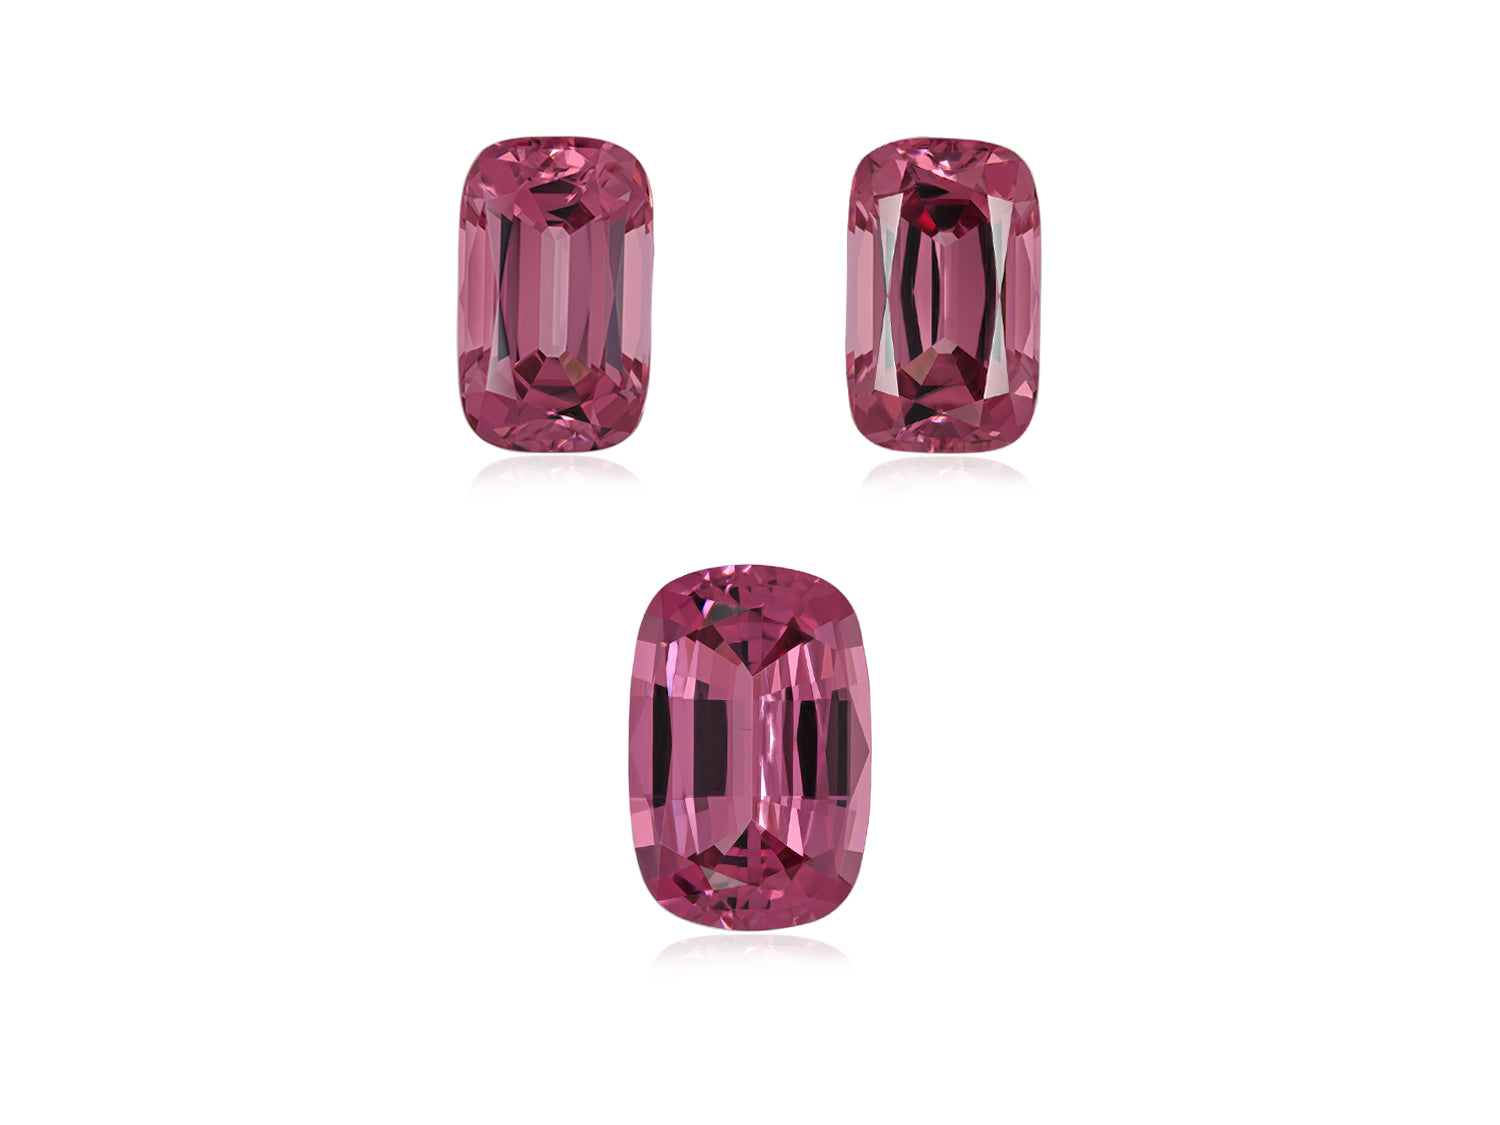 Neon Pink Spinel 21.04 CT / 3